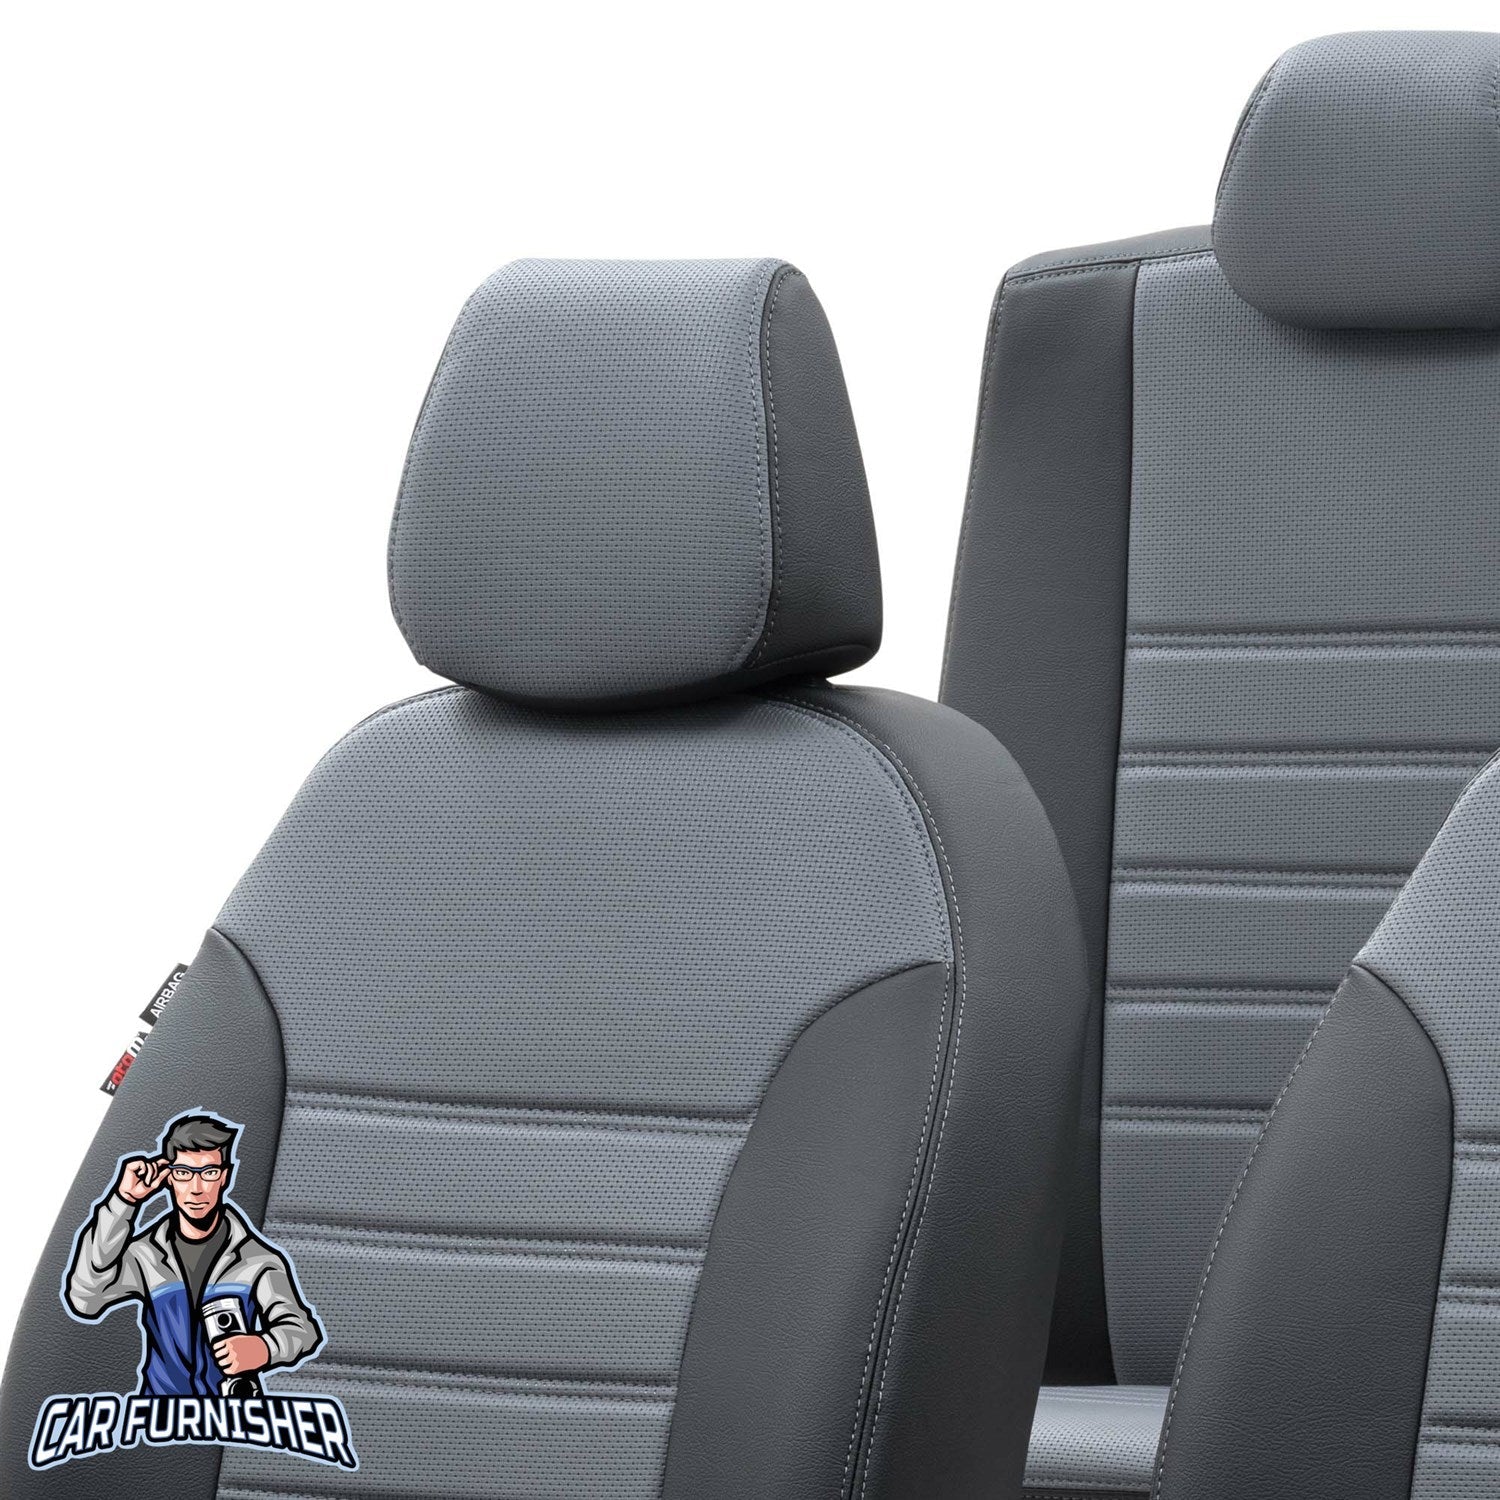 Volvo S60 Car Seat Cover 2000-2018 T4/T5/T6/T8/D5 New York Design Smoked Black Full Set (5 Seats + Handrest) Leather & Fabric